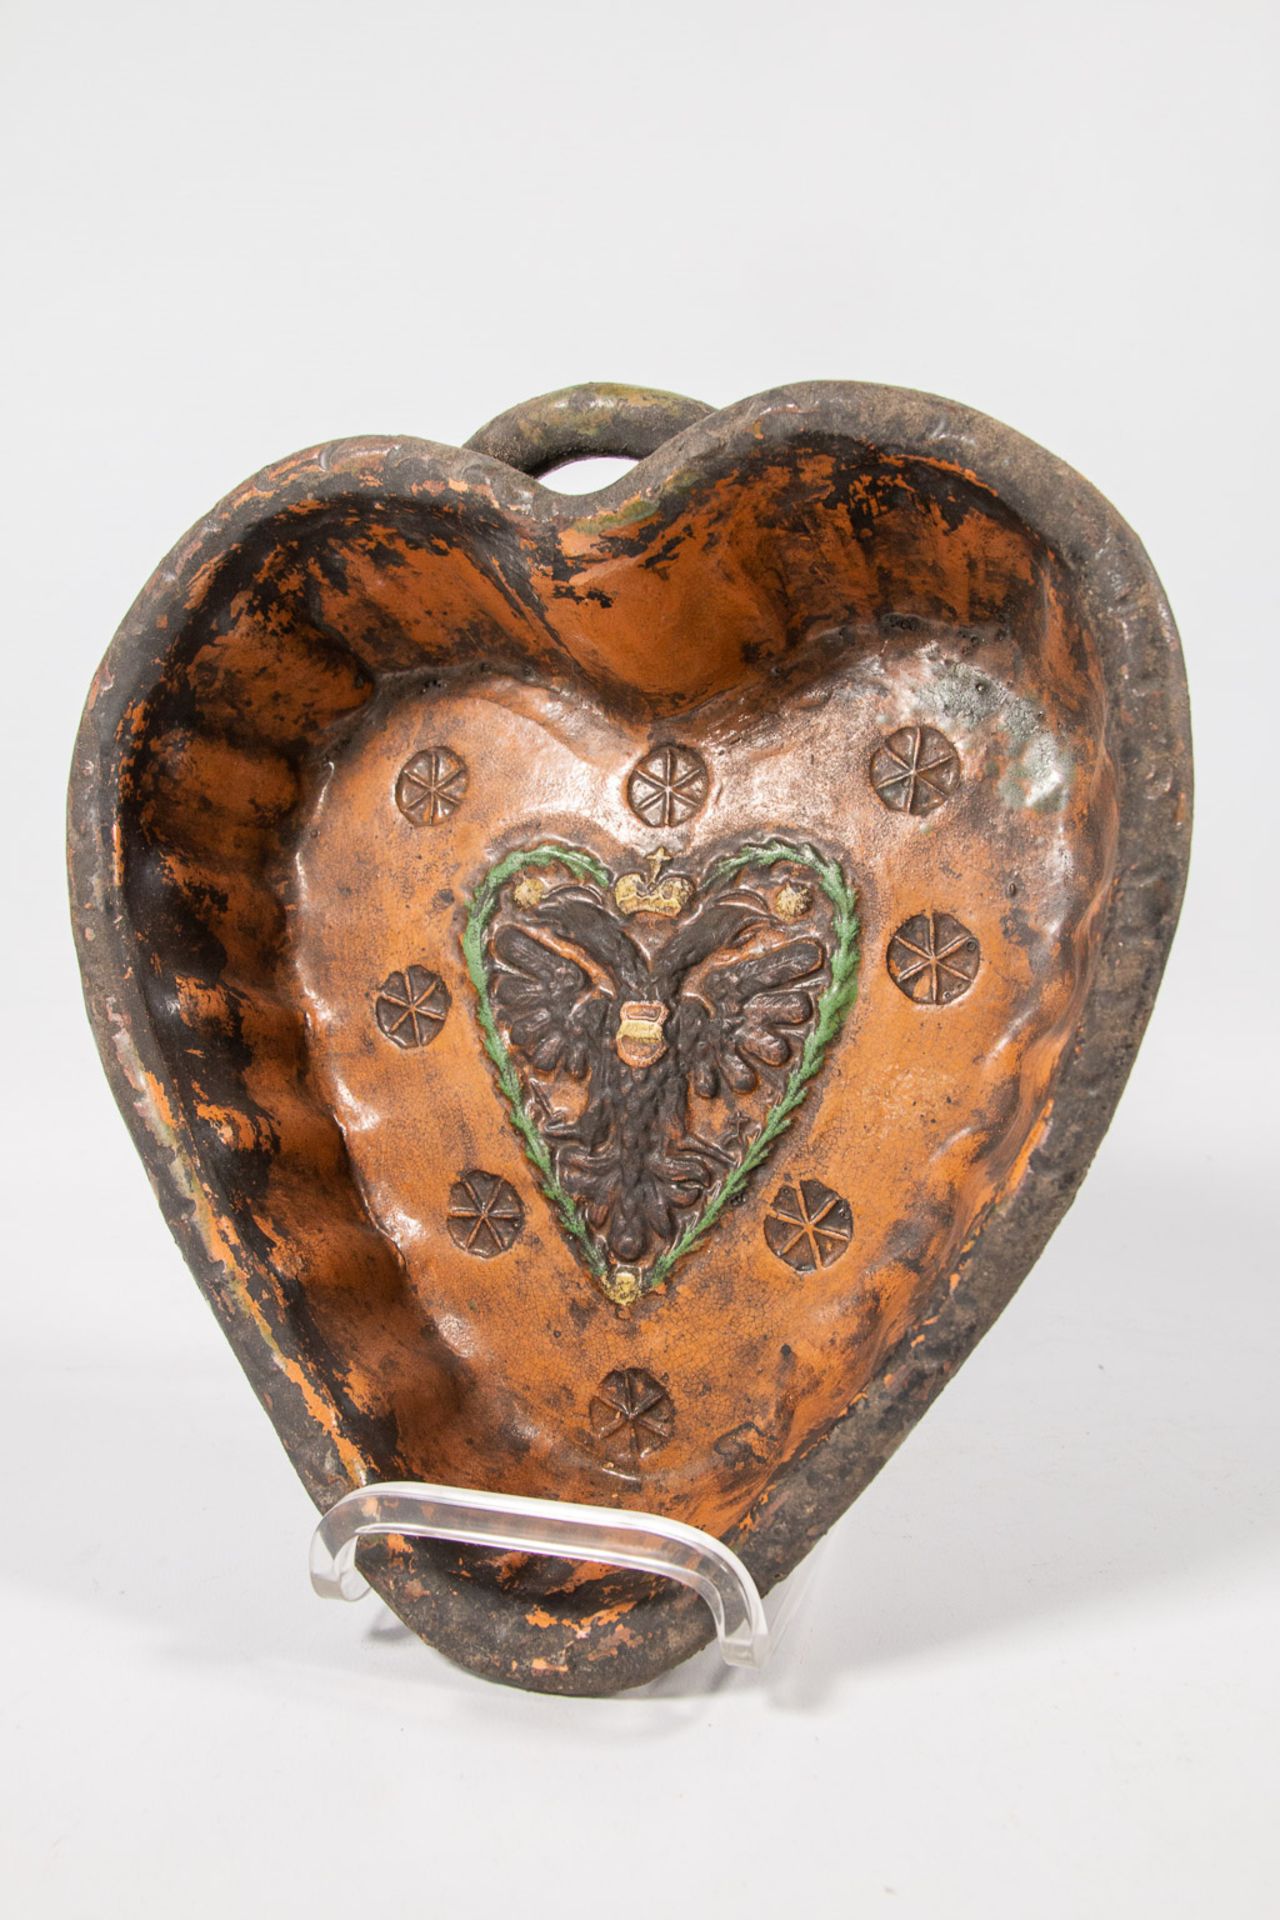 A Collection of 2 baking forms in shape of a heart - Image 18 of 27